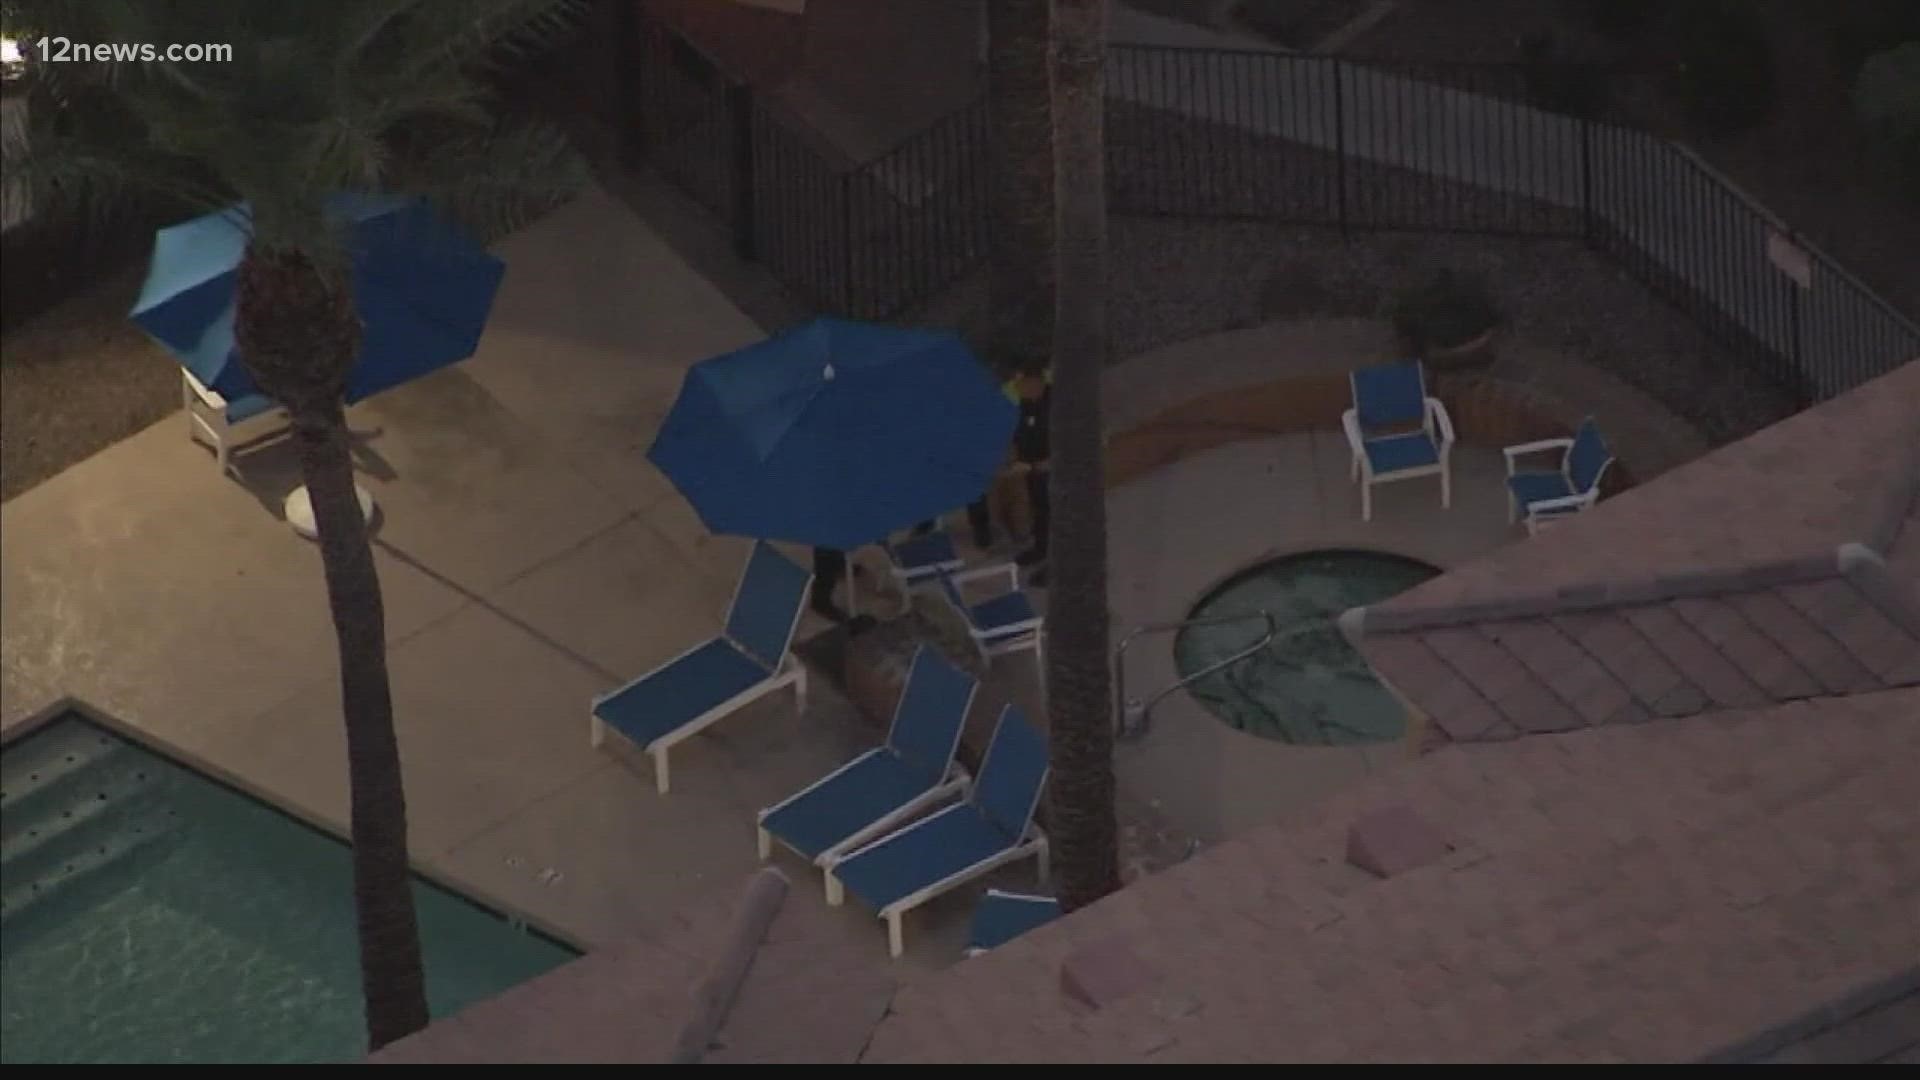 A young girl was rushed to a hospital after she was found unconscious at an apartment pool in central Phoenix on Monday.